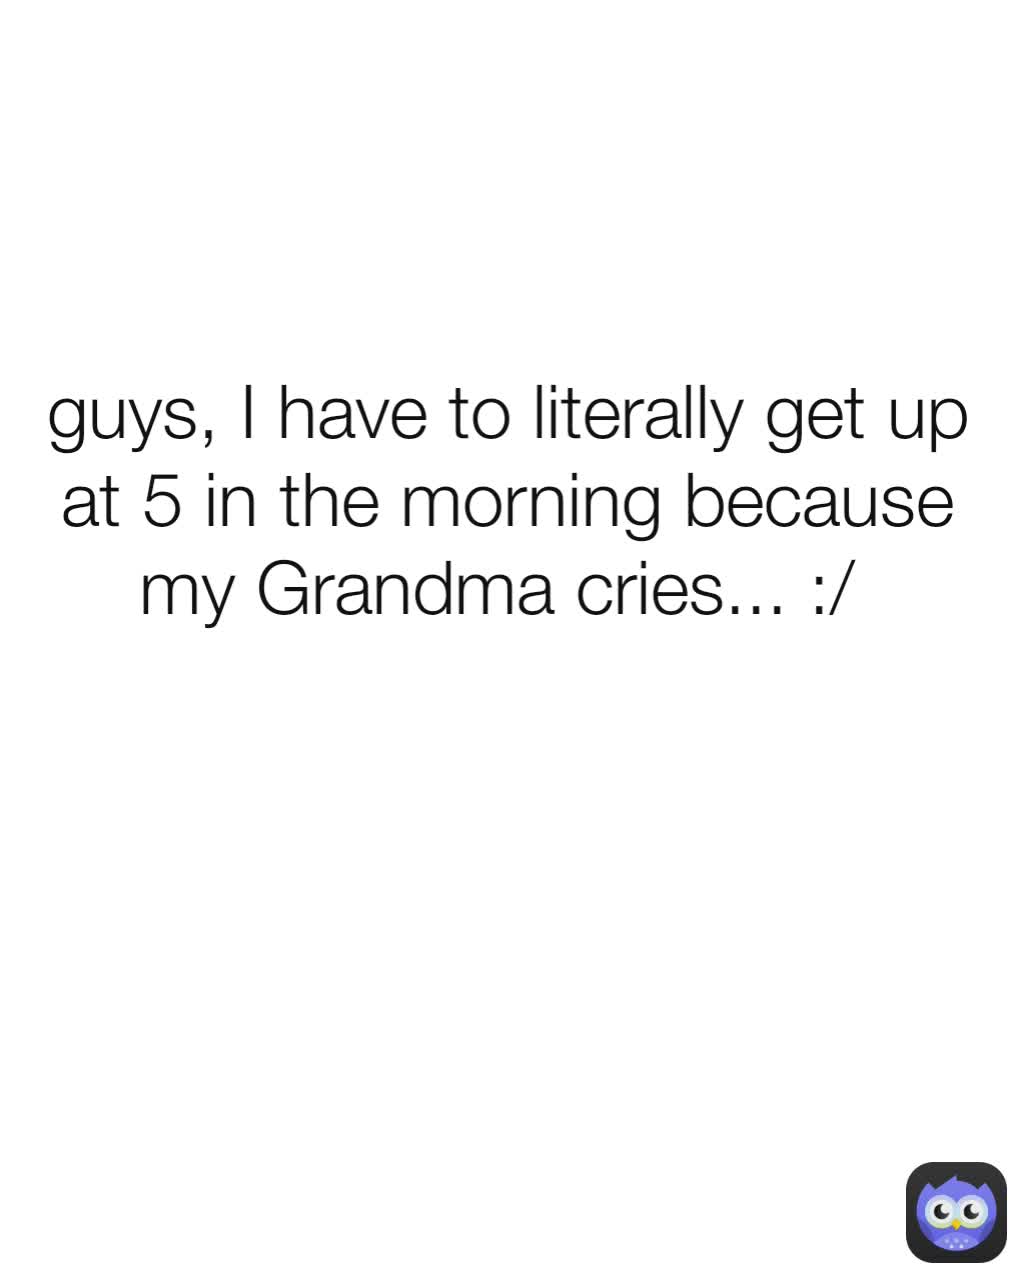 guys, I have to literally get up at 5 in the morning because my Grandma cries... :/ 